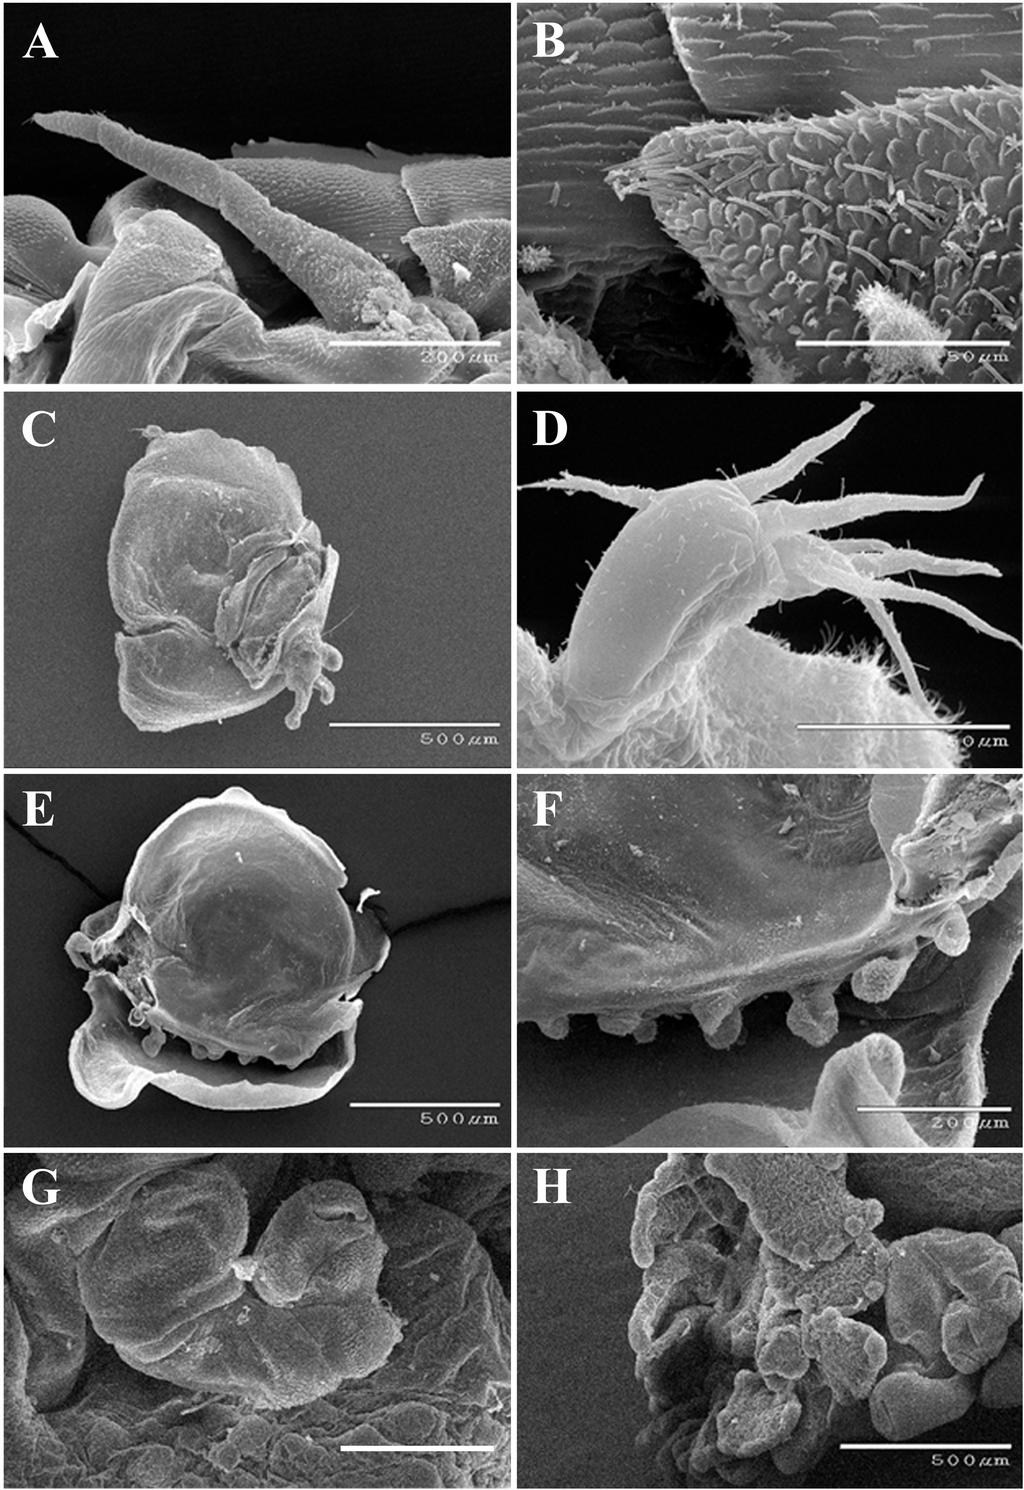 Williams et al.: Branchial parasitic isopods of hermit crabs from the western Pacific Fig. 9. Bopyrissa marami, new species, female paratype, USNM 1493920.